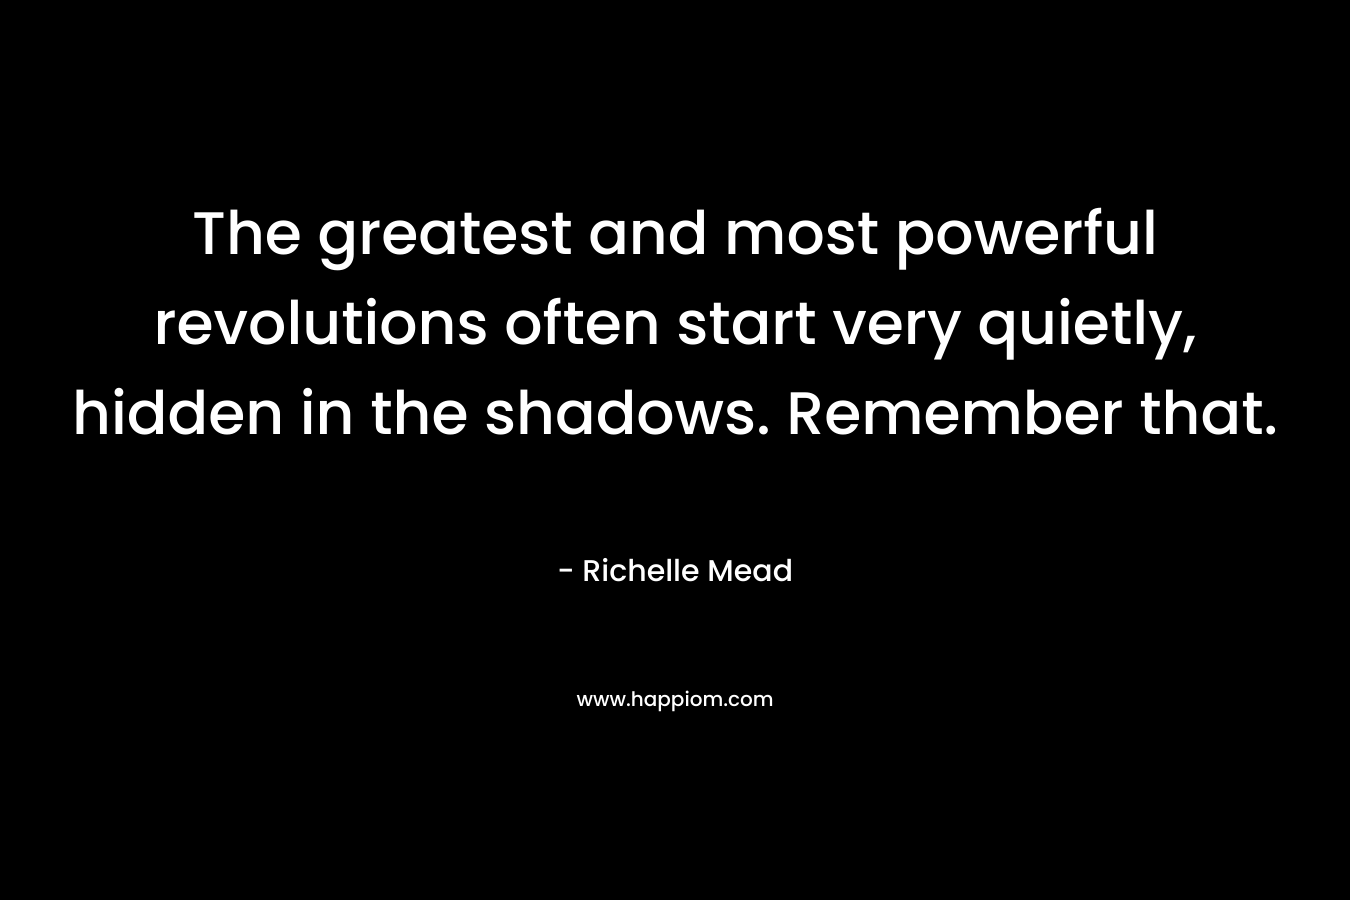 The greatest and most powerful revolutions often start very quietly, hidden in the shadows. Remember that.